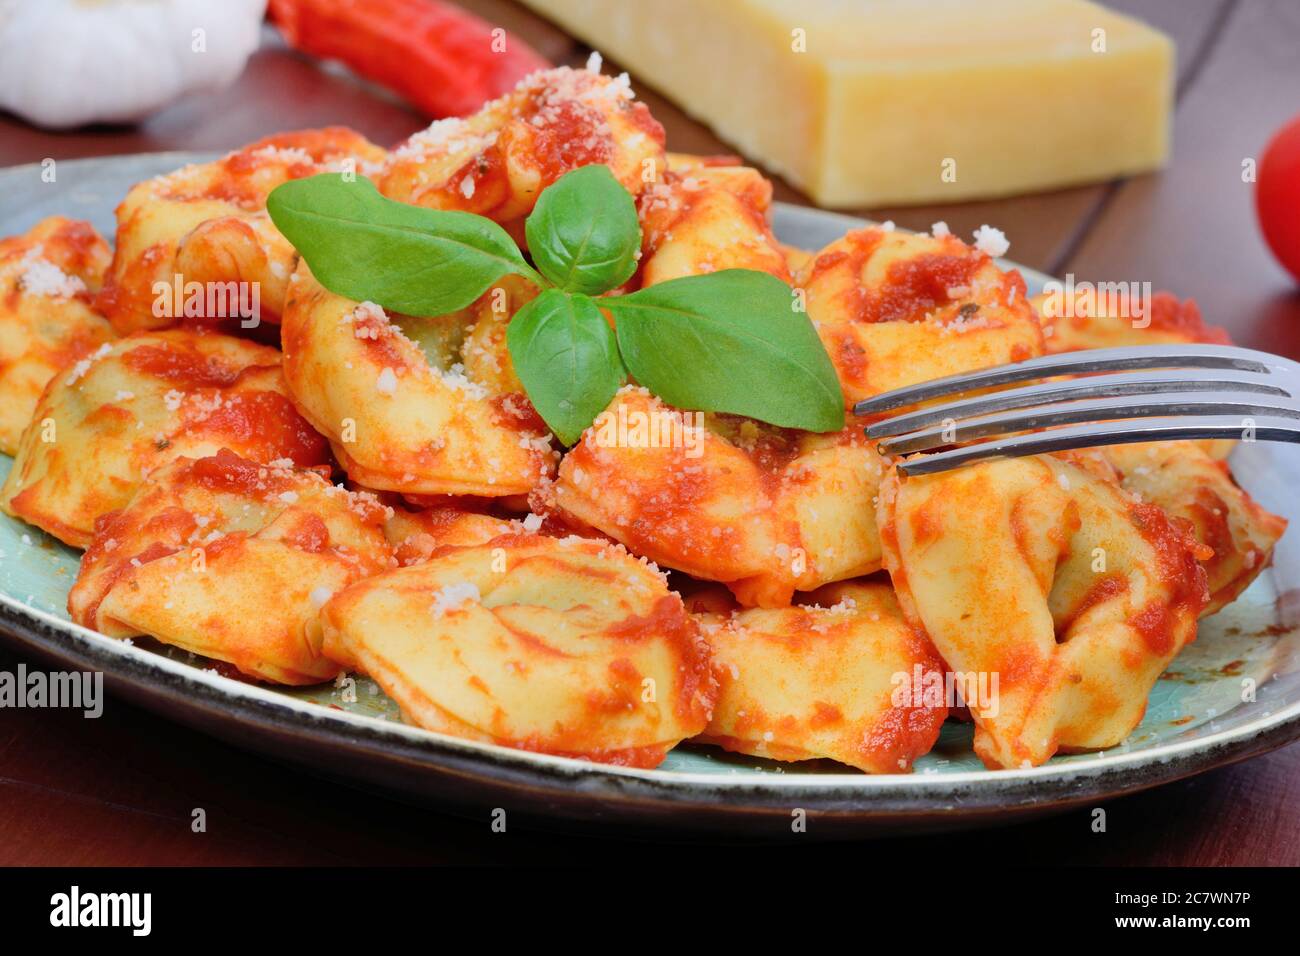 Tortellini with tomatoes sauce in a plate on table Stock Photo